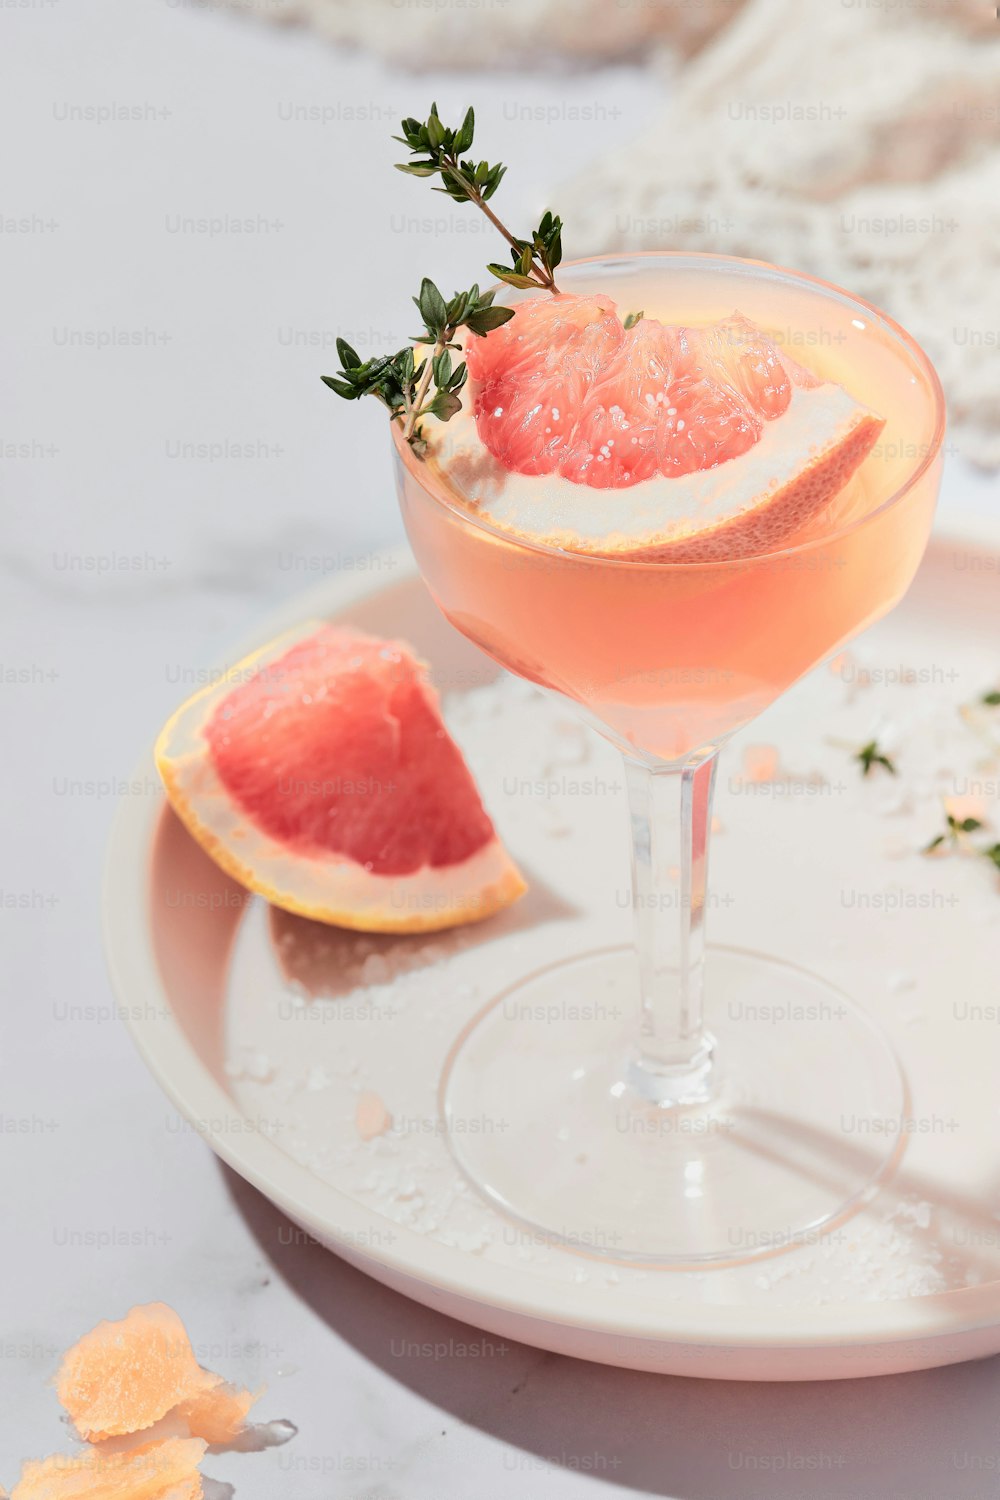 a grapefruit cocktail garnished with a sprig of rosemary